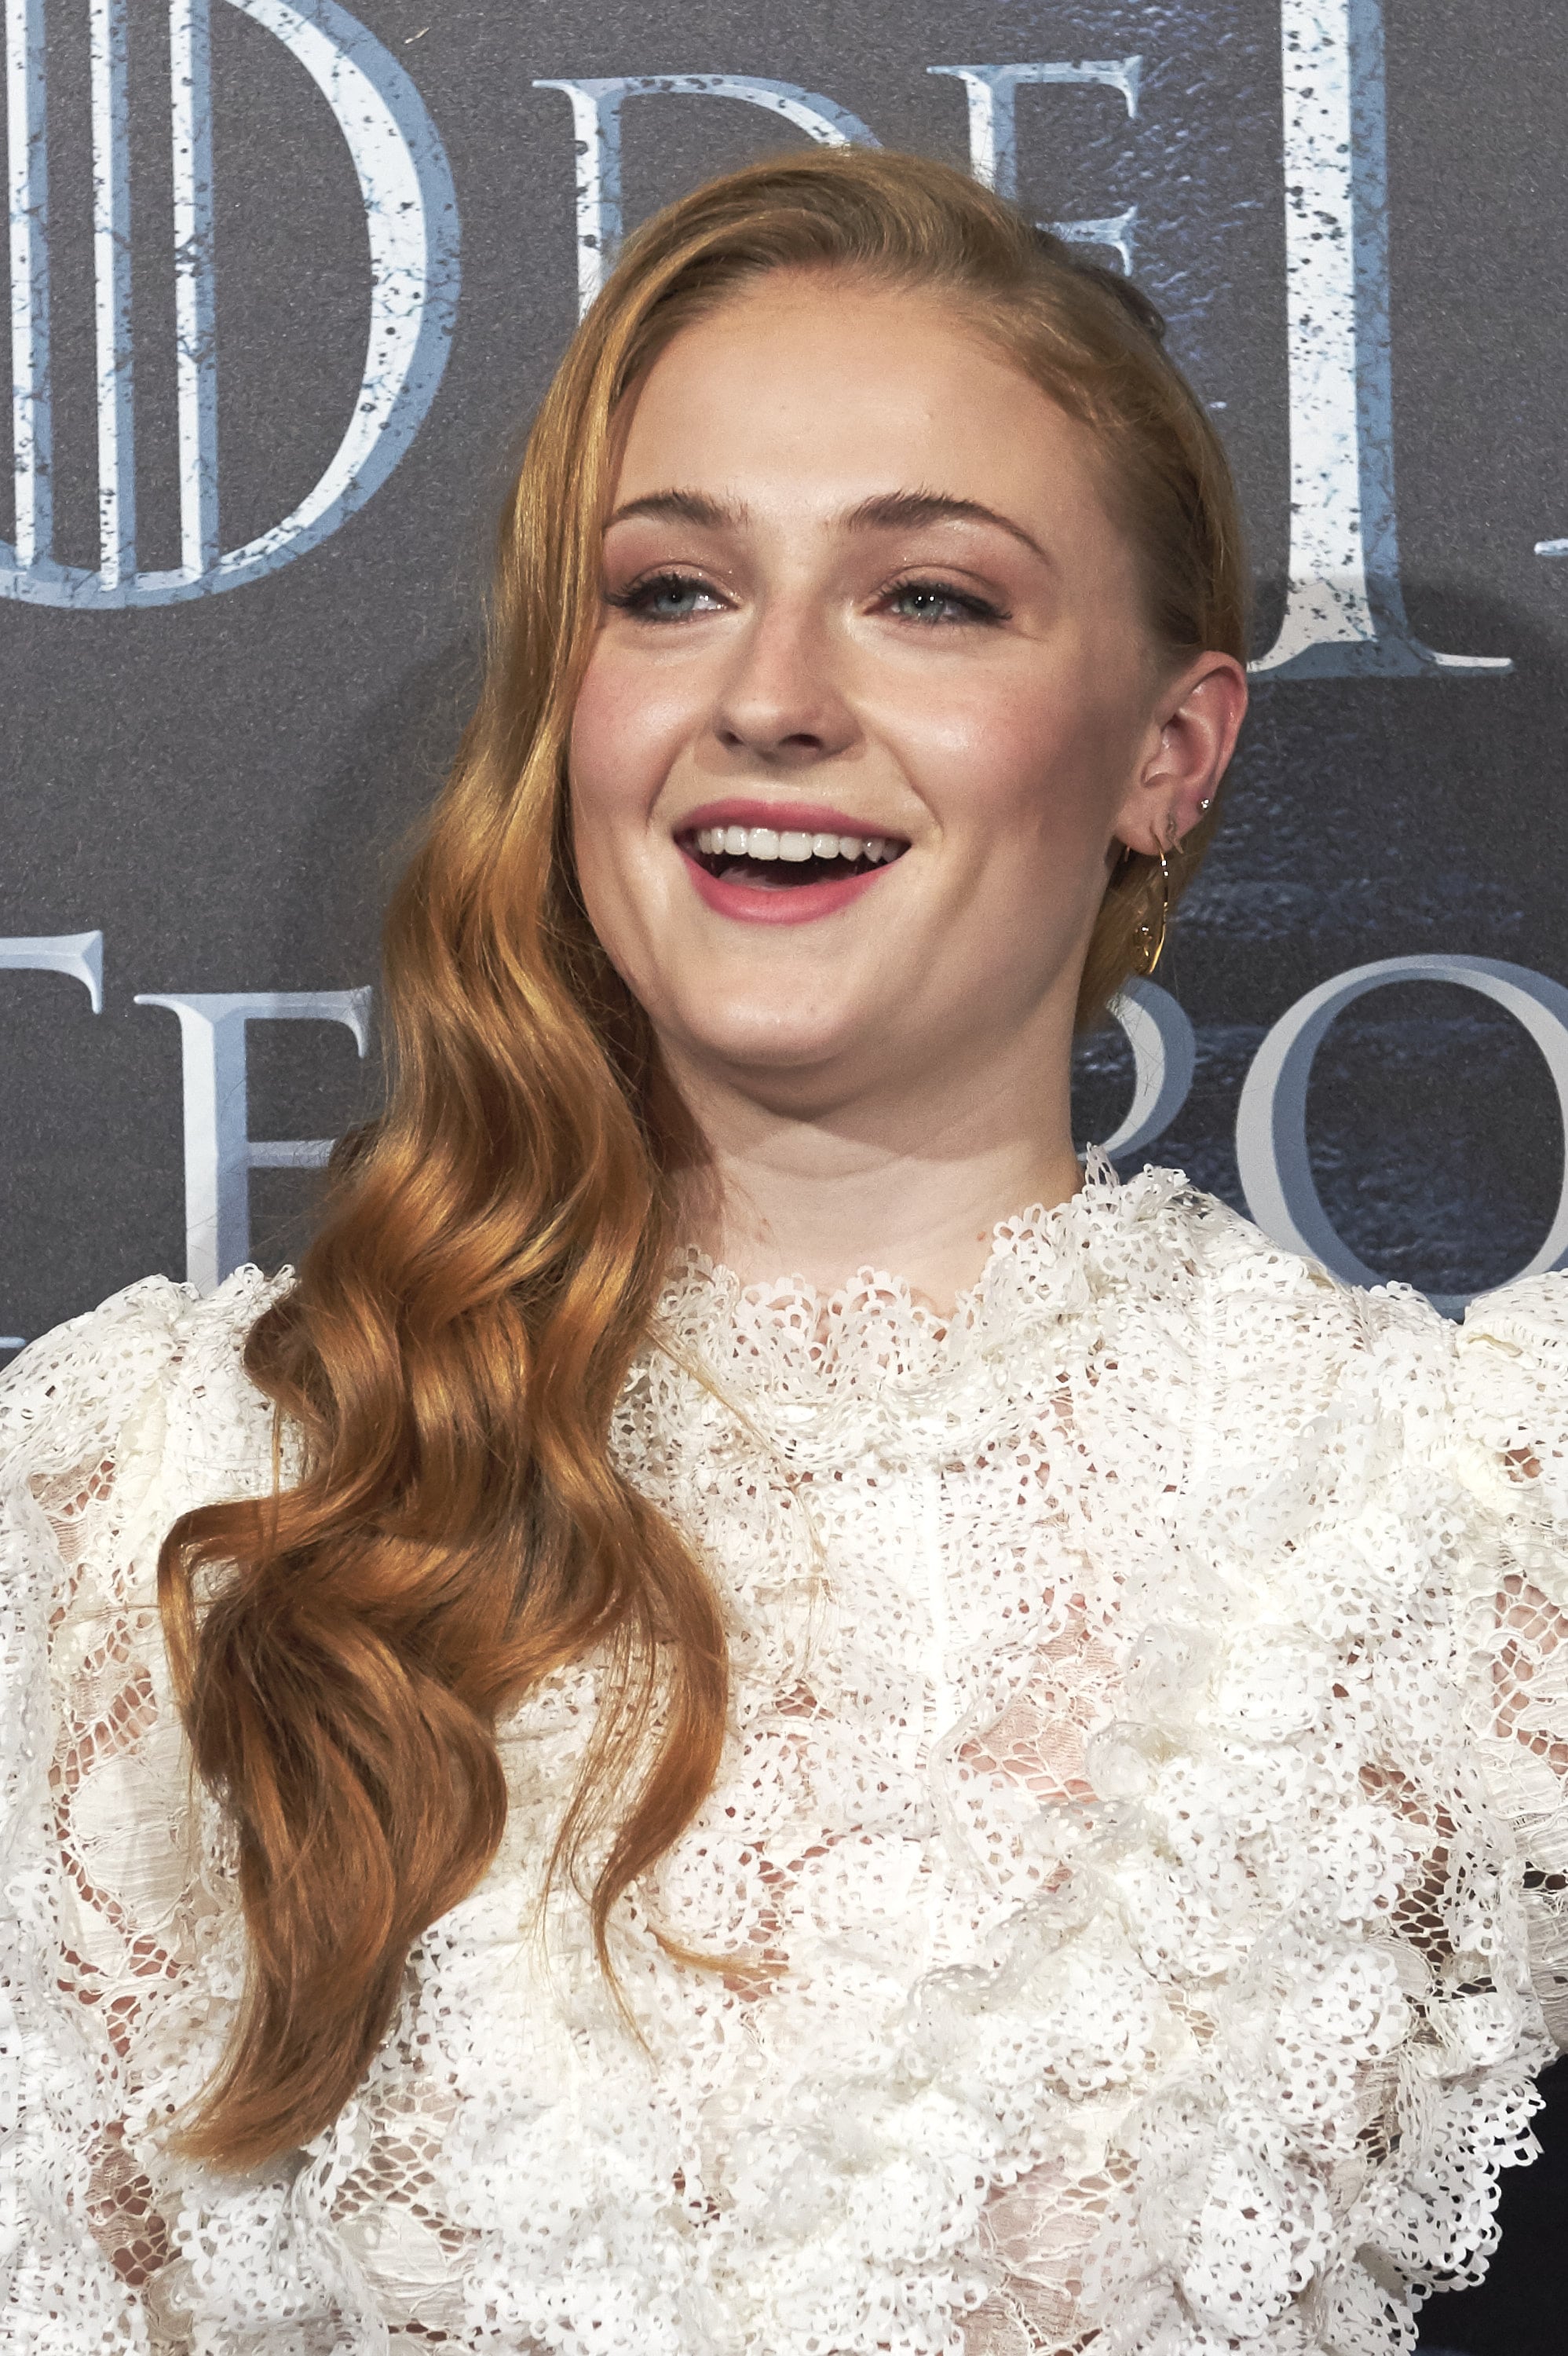 Sophie Turner's Dark Red Hair Is A Dramatic Return To Her Signature Color